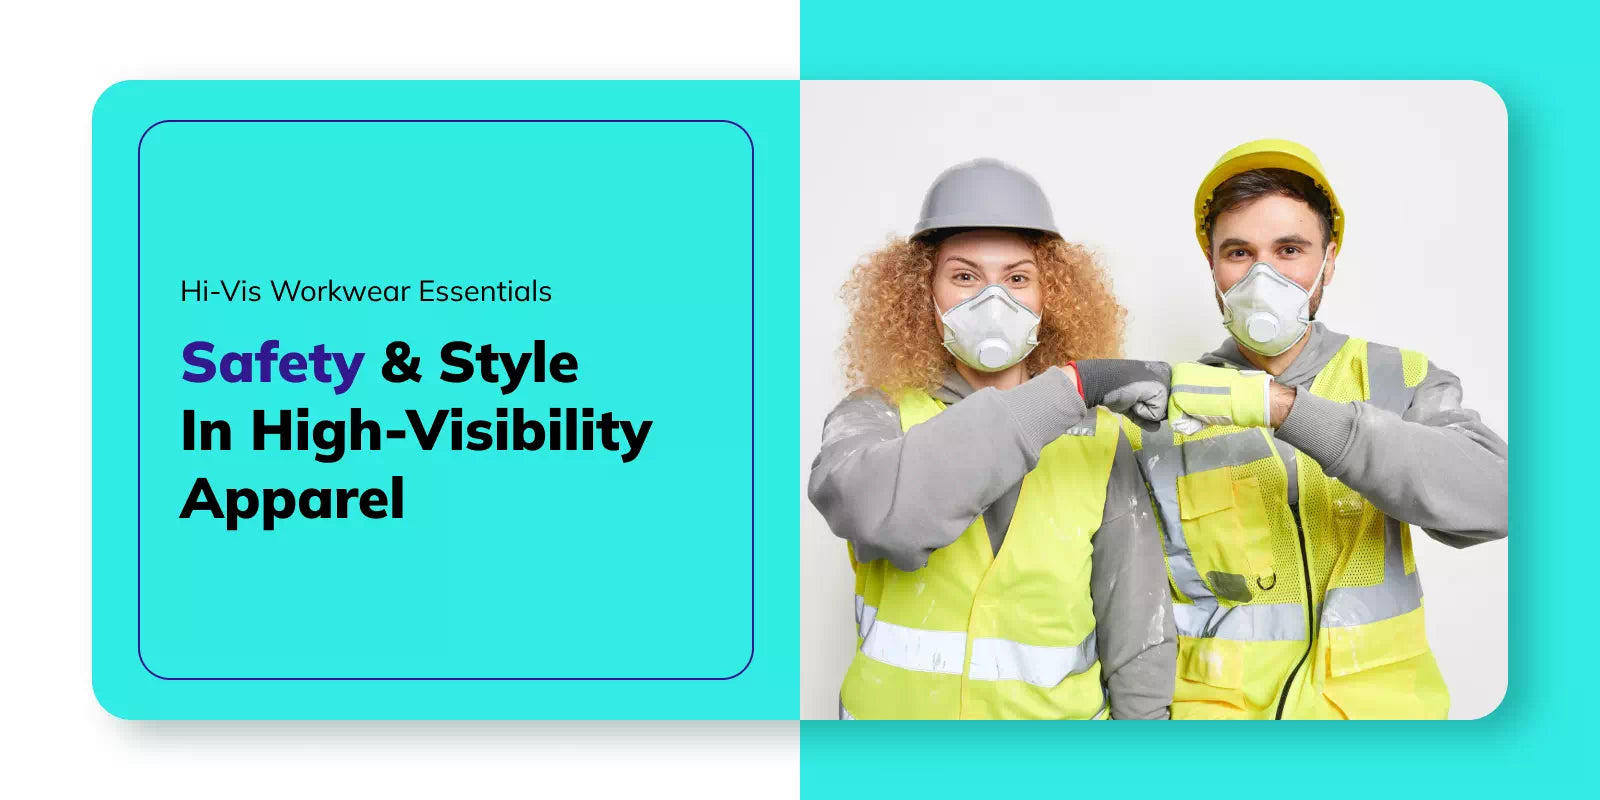 Hi-Vis Workwear Essentials: Safety and Style in High-Visibility Apparel